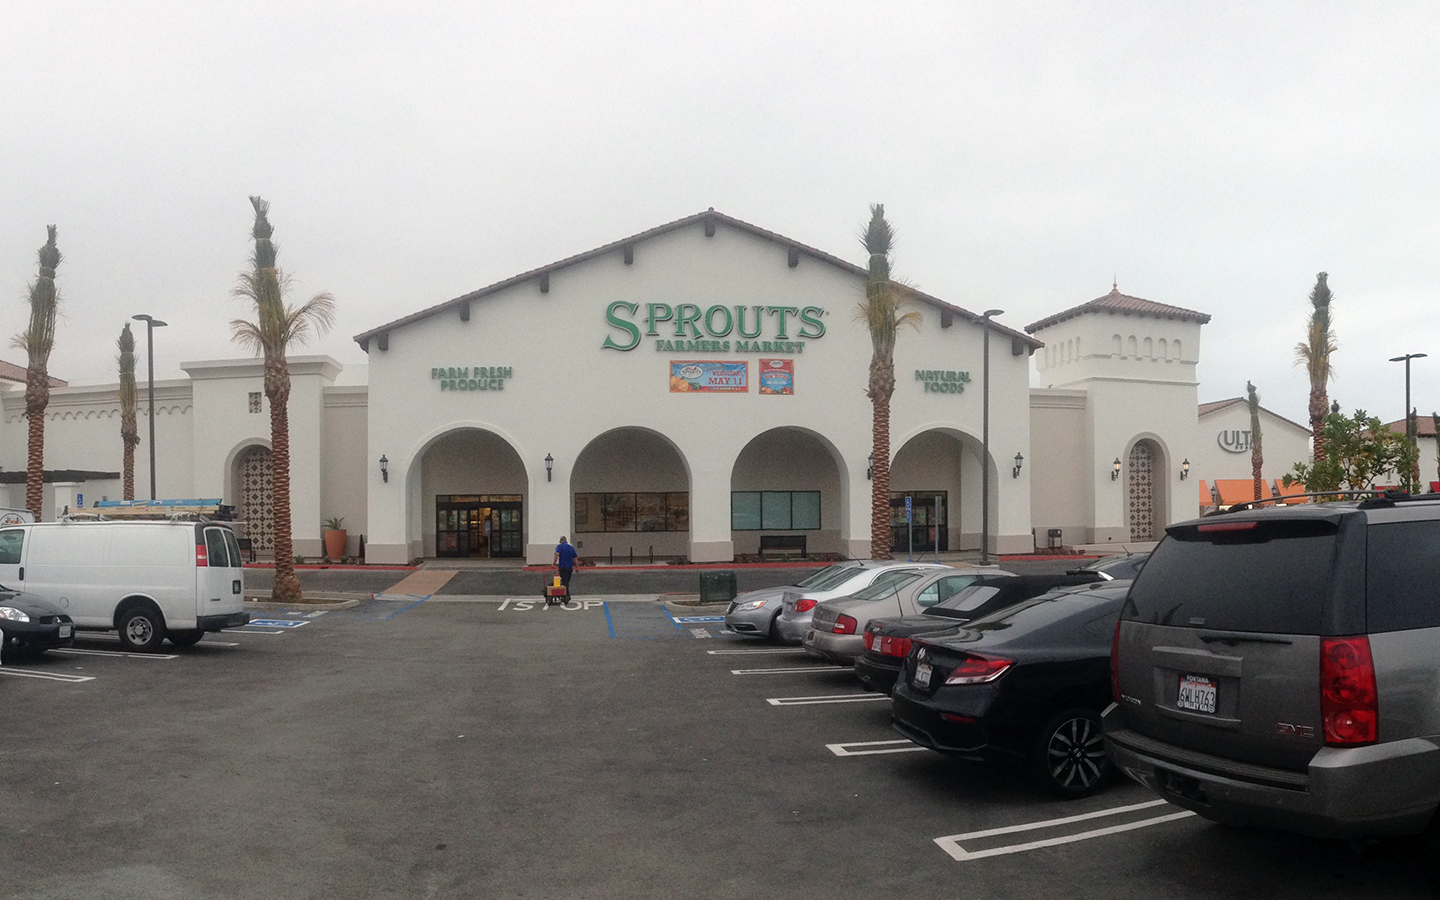 2-14-120_Sprouts – San Clemente CA_PW